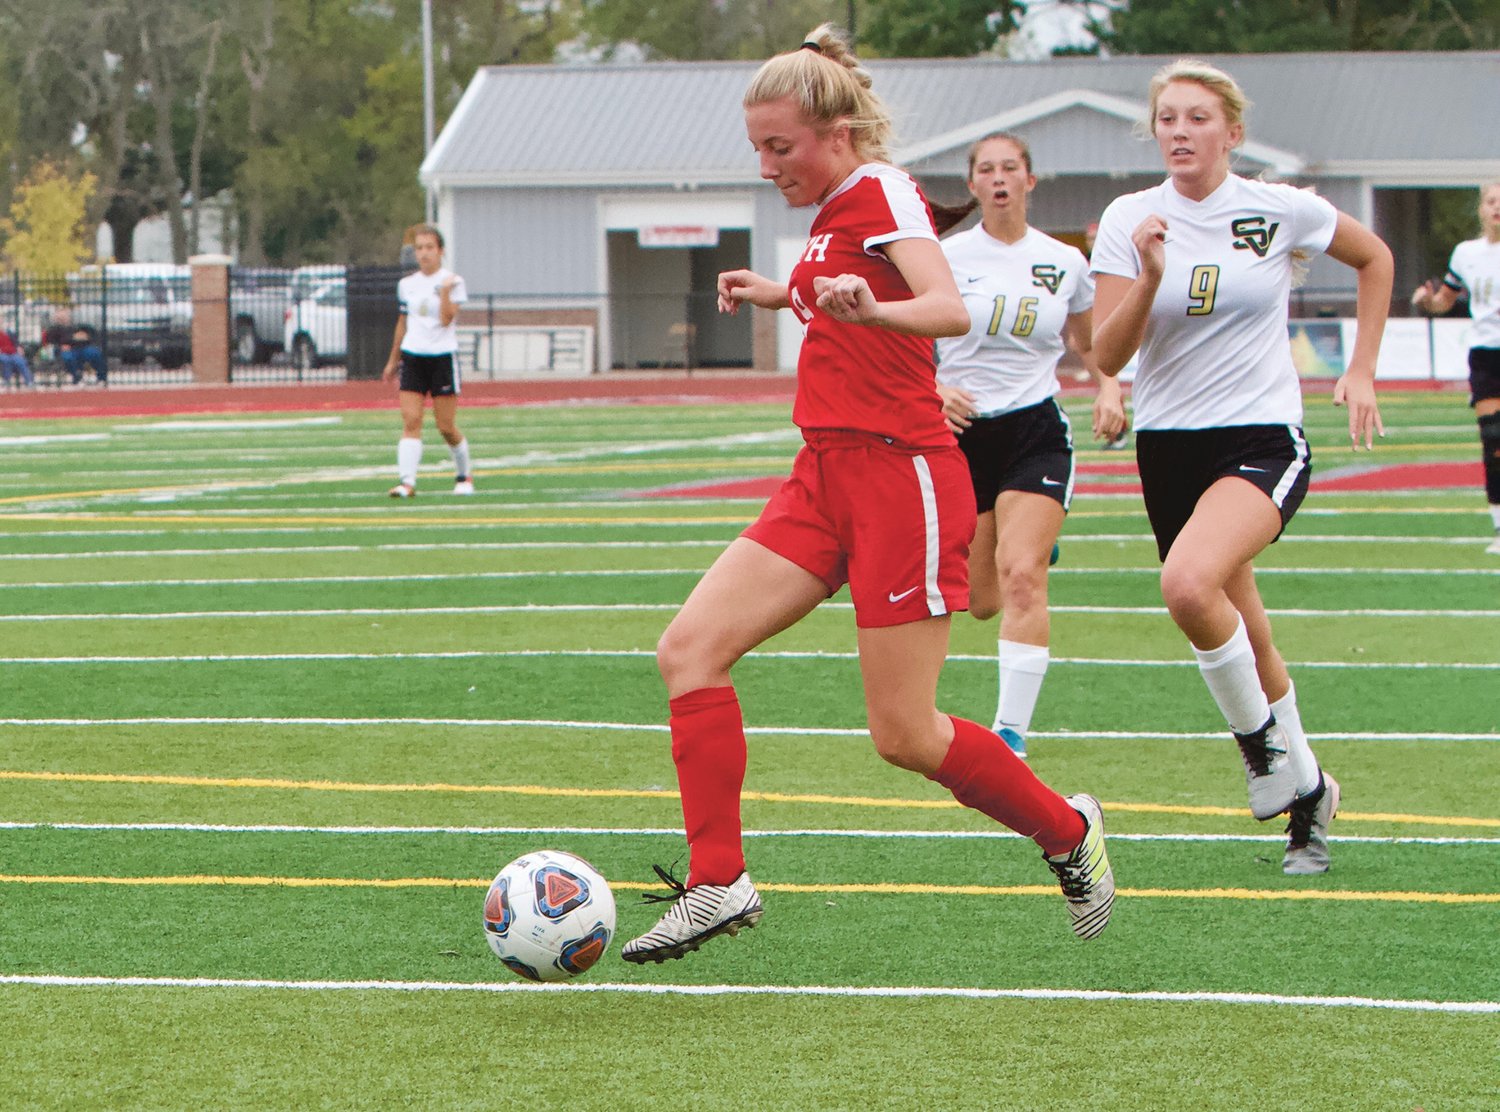 Southmont senior Lexie Odum helped lead the Mounties to a third-straight sectional title last fall.